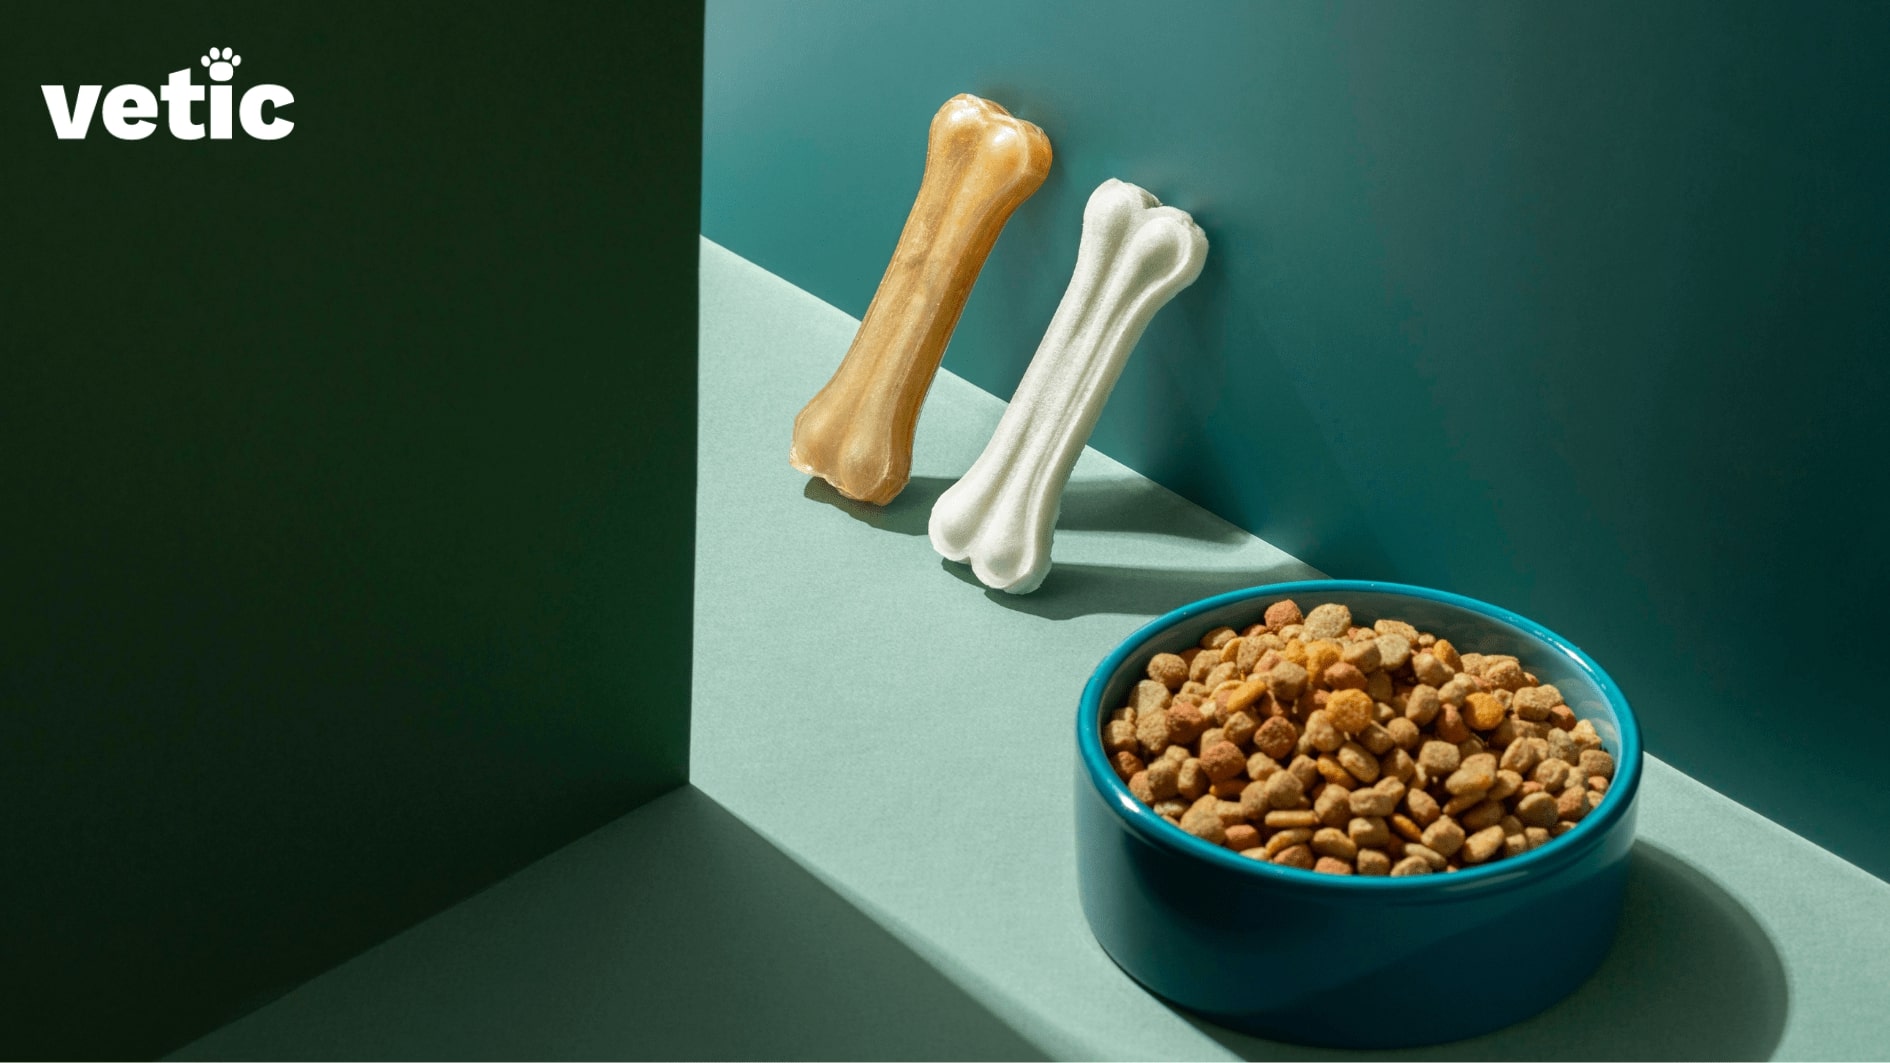 Image of two chew bones, likely made of raw-hide, and dental-friendly kibbles in a blue bowl. the right chew sticks and kibbles can improve a dog's teeth condition.